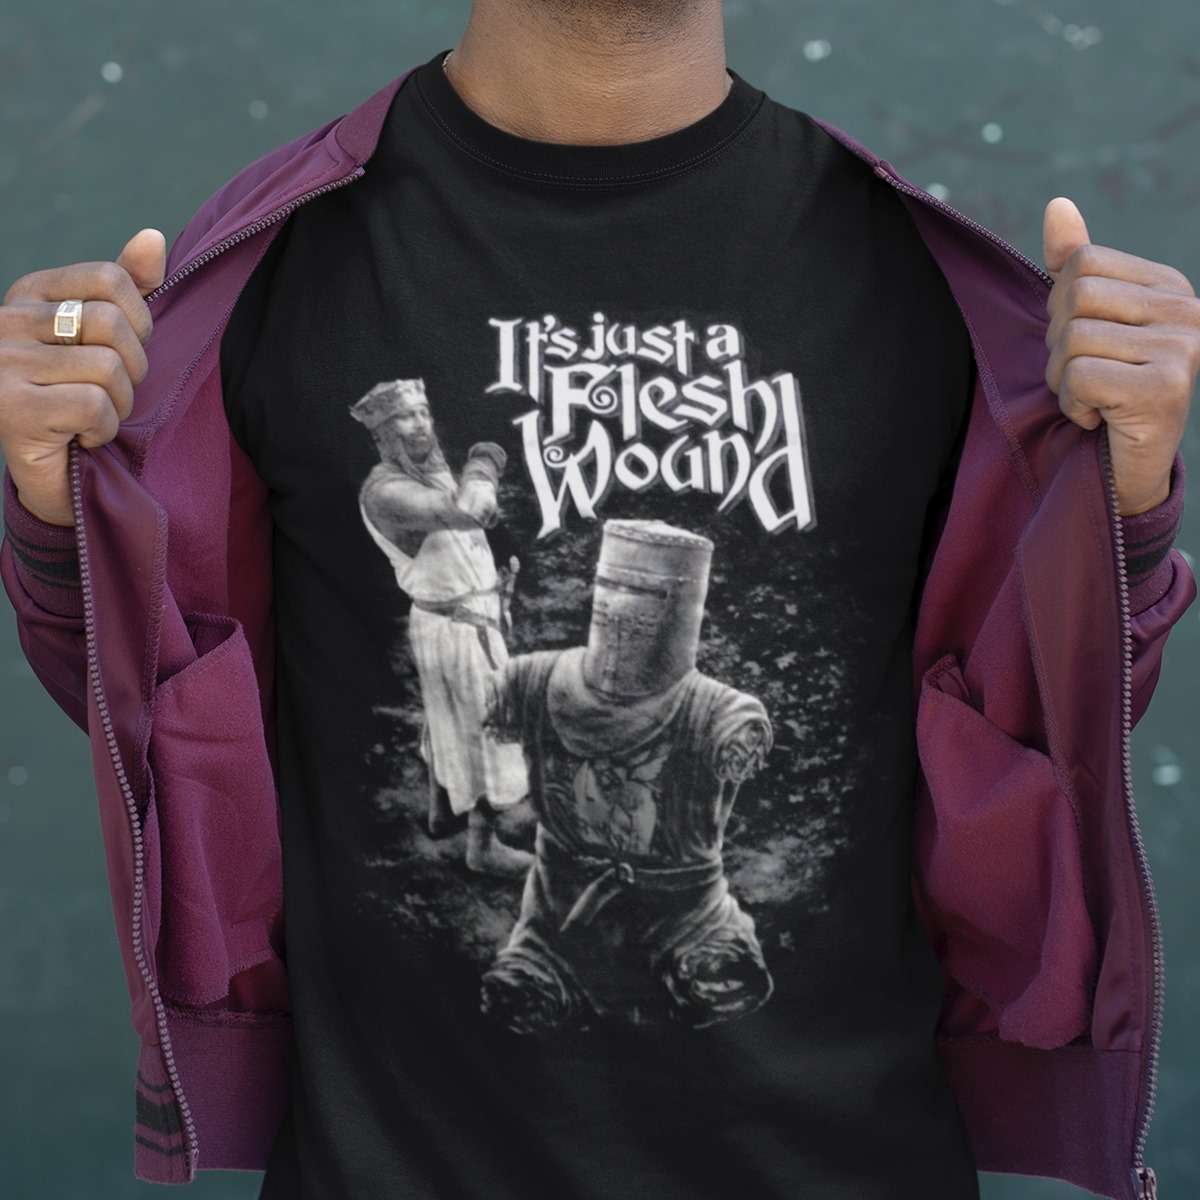 It's just a flesh wound - MOnty Python and The Holy Grail